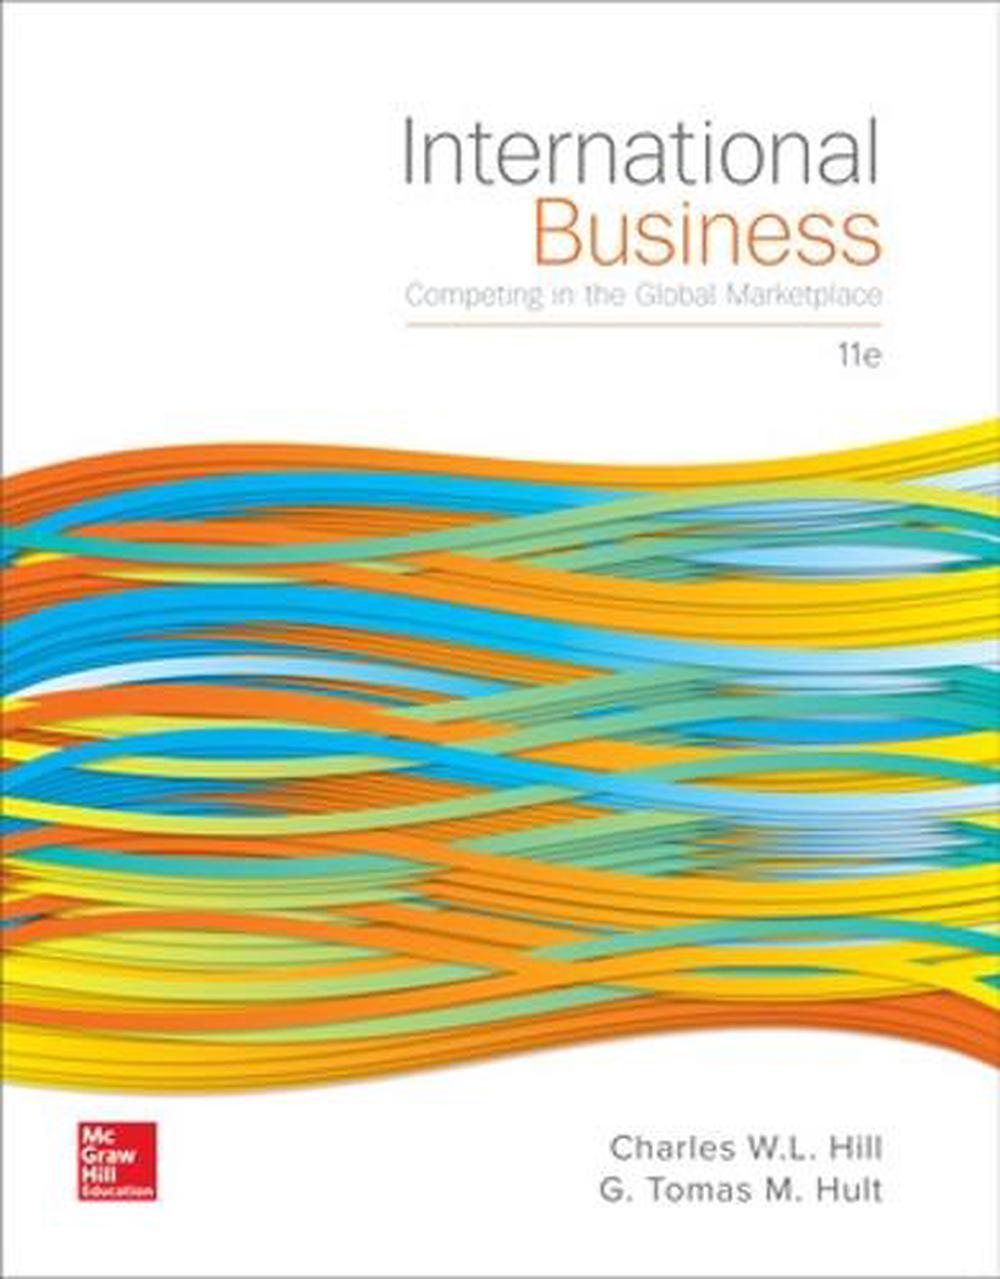 International Business Competing in the Global Marketplace 11th Edition by Char